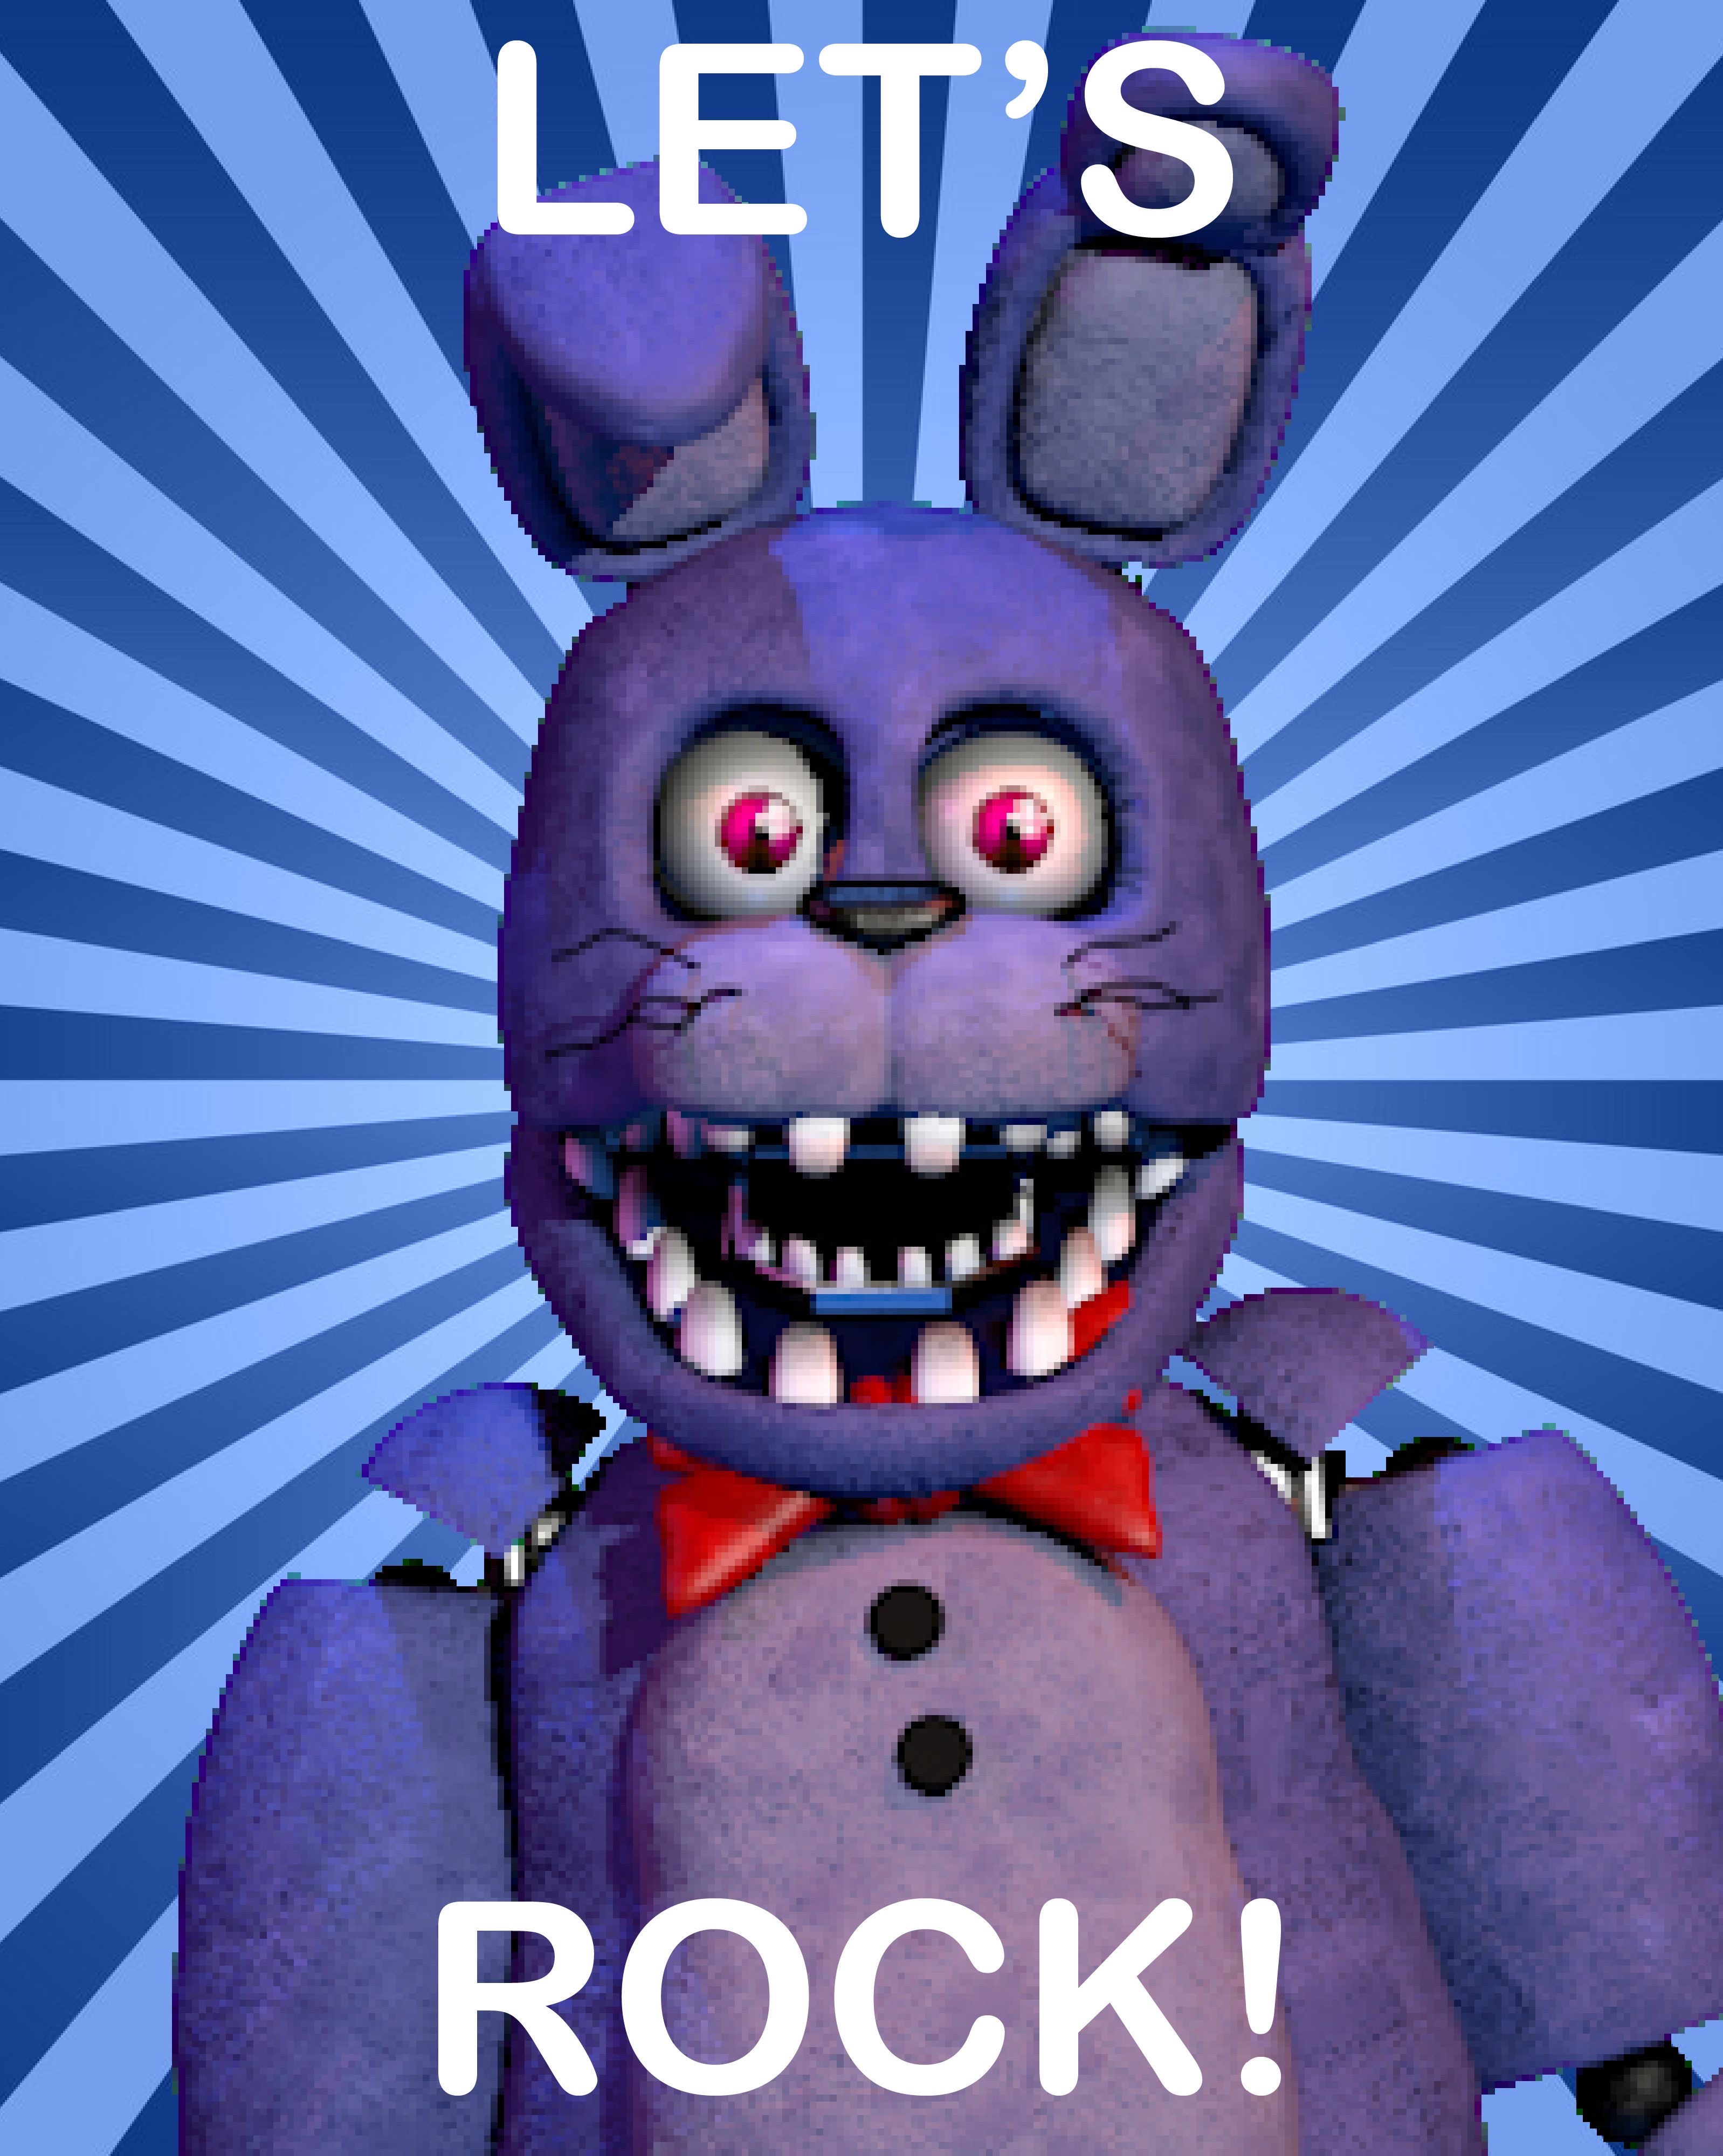 The joy of creation posters remake (Foxy) by Bugmaser on DeviantArt